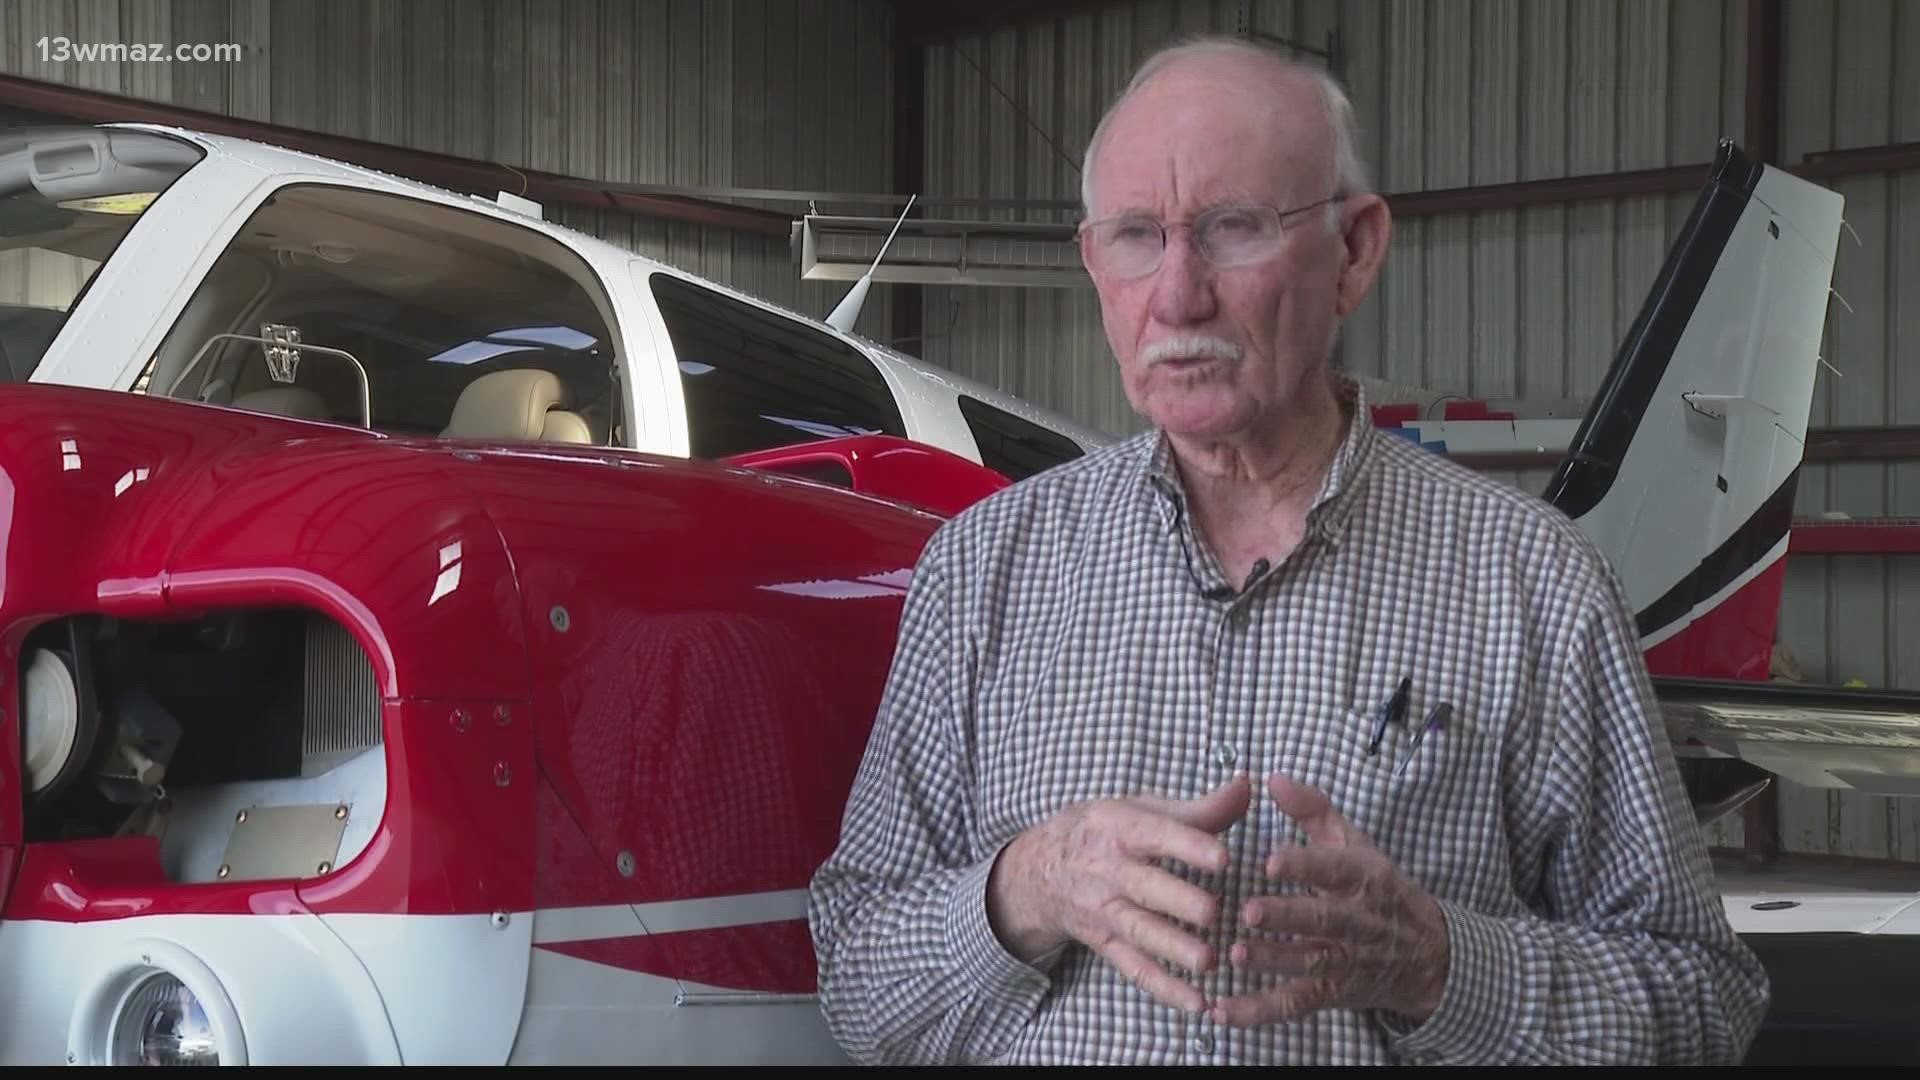 A 79-year-old Dublin Veteran received the Wright Brothers Award for more than 50 years of safe flight and instruction.